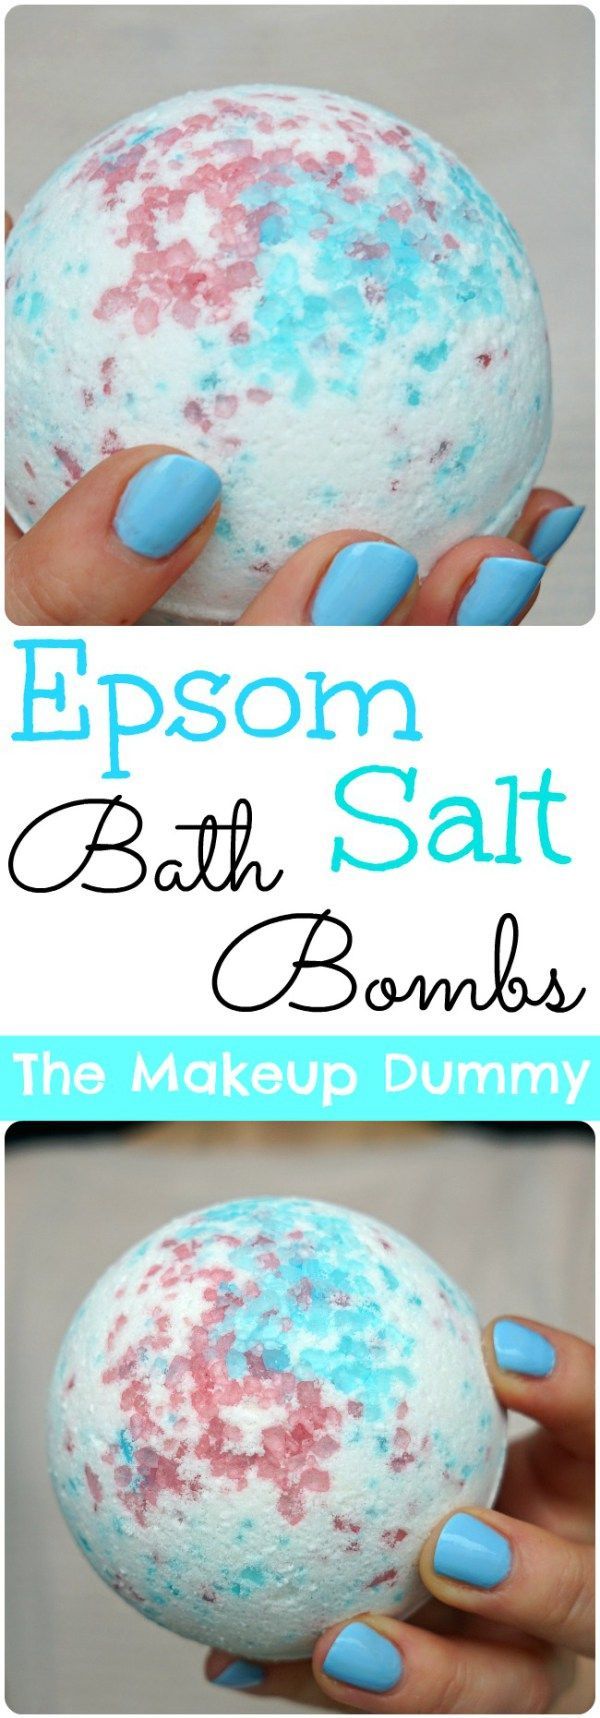 Make your own amazing LUSH inspired DIY Bath Bombs! Copycat tutorial by The Makeup Dummy